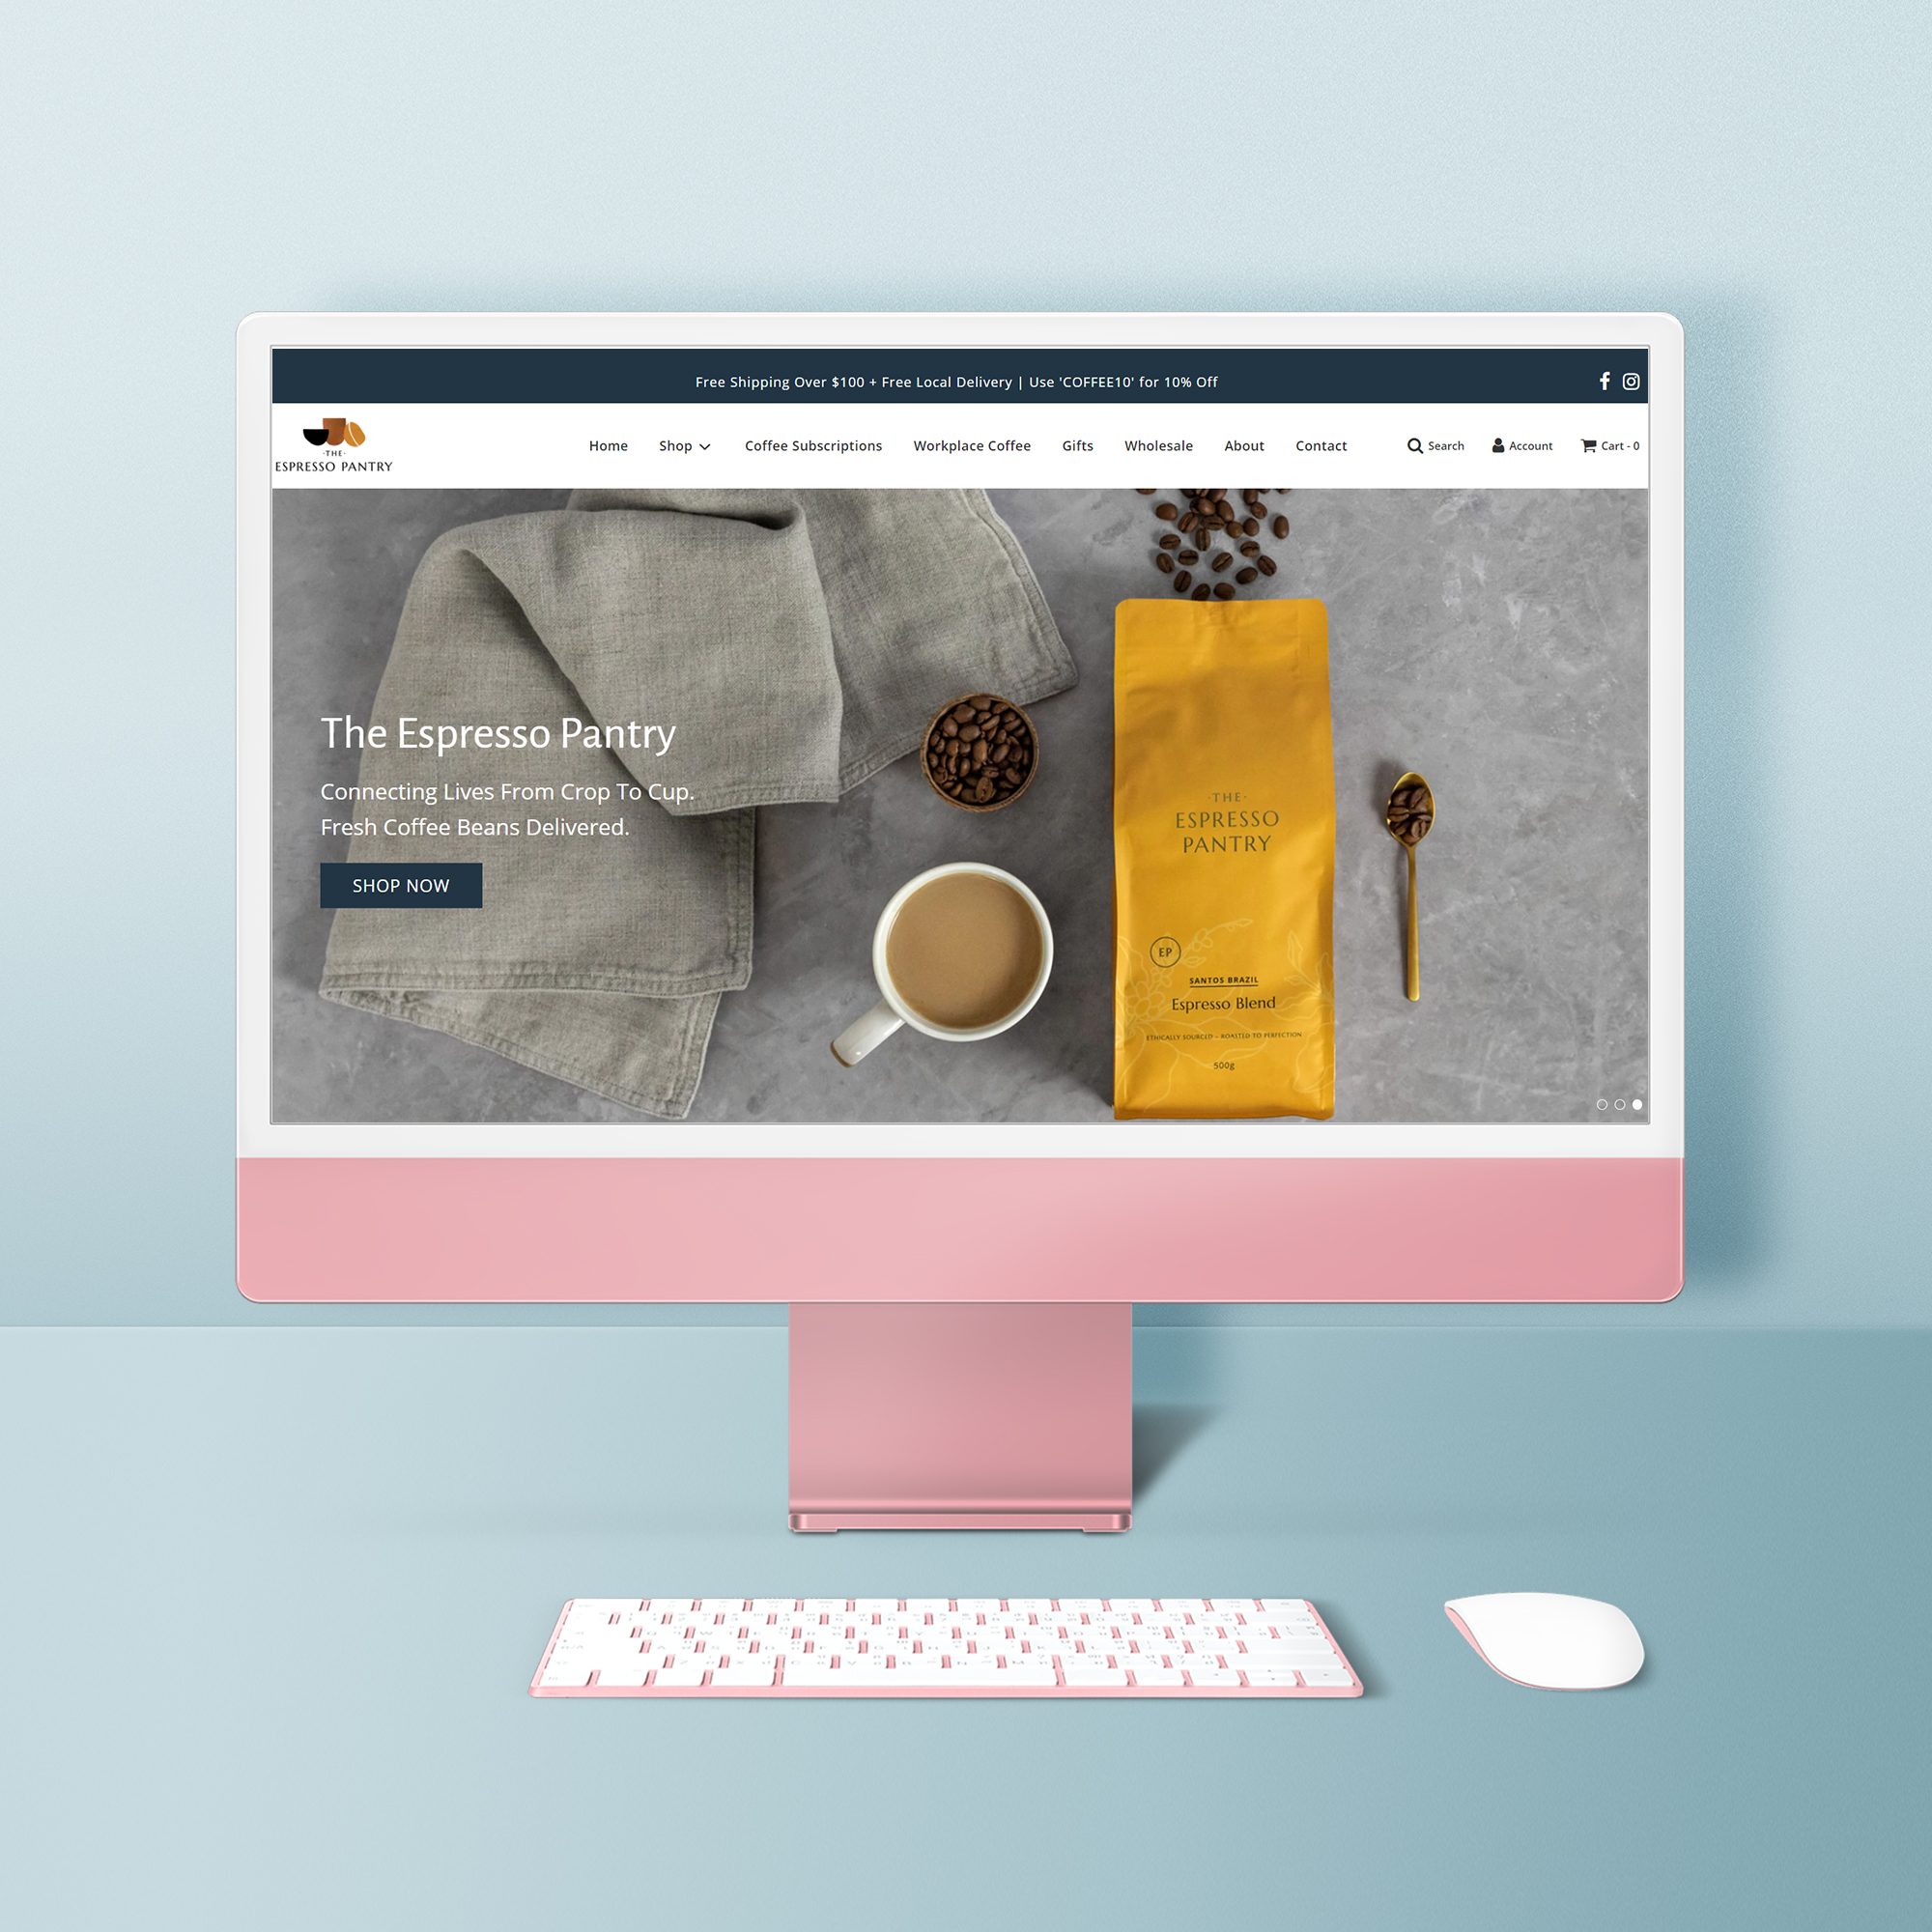 The Espresso Pantry Website design by Think Goat